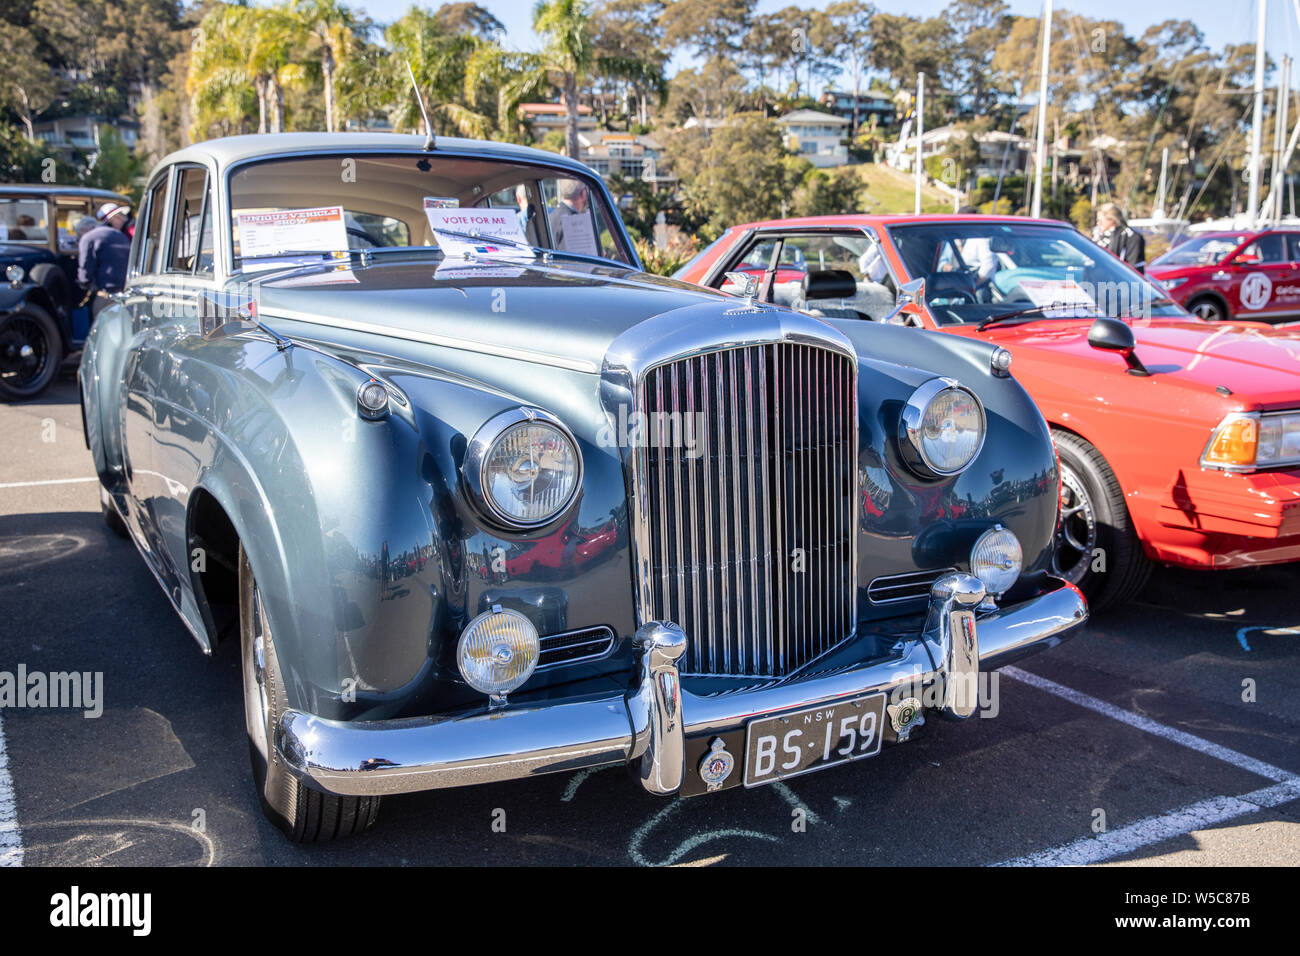 Bentley S1 motor car from 1959 on display at a classic car show in Newport, Sydney ,Aiustralia Stock Photo